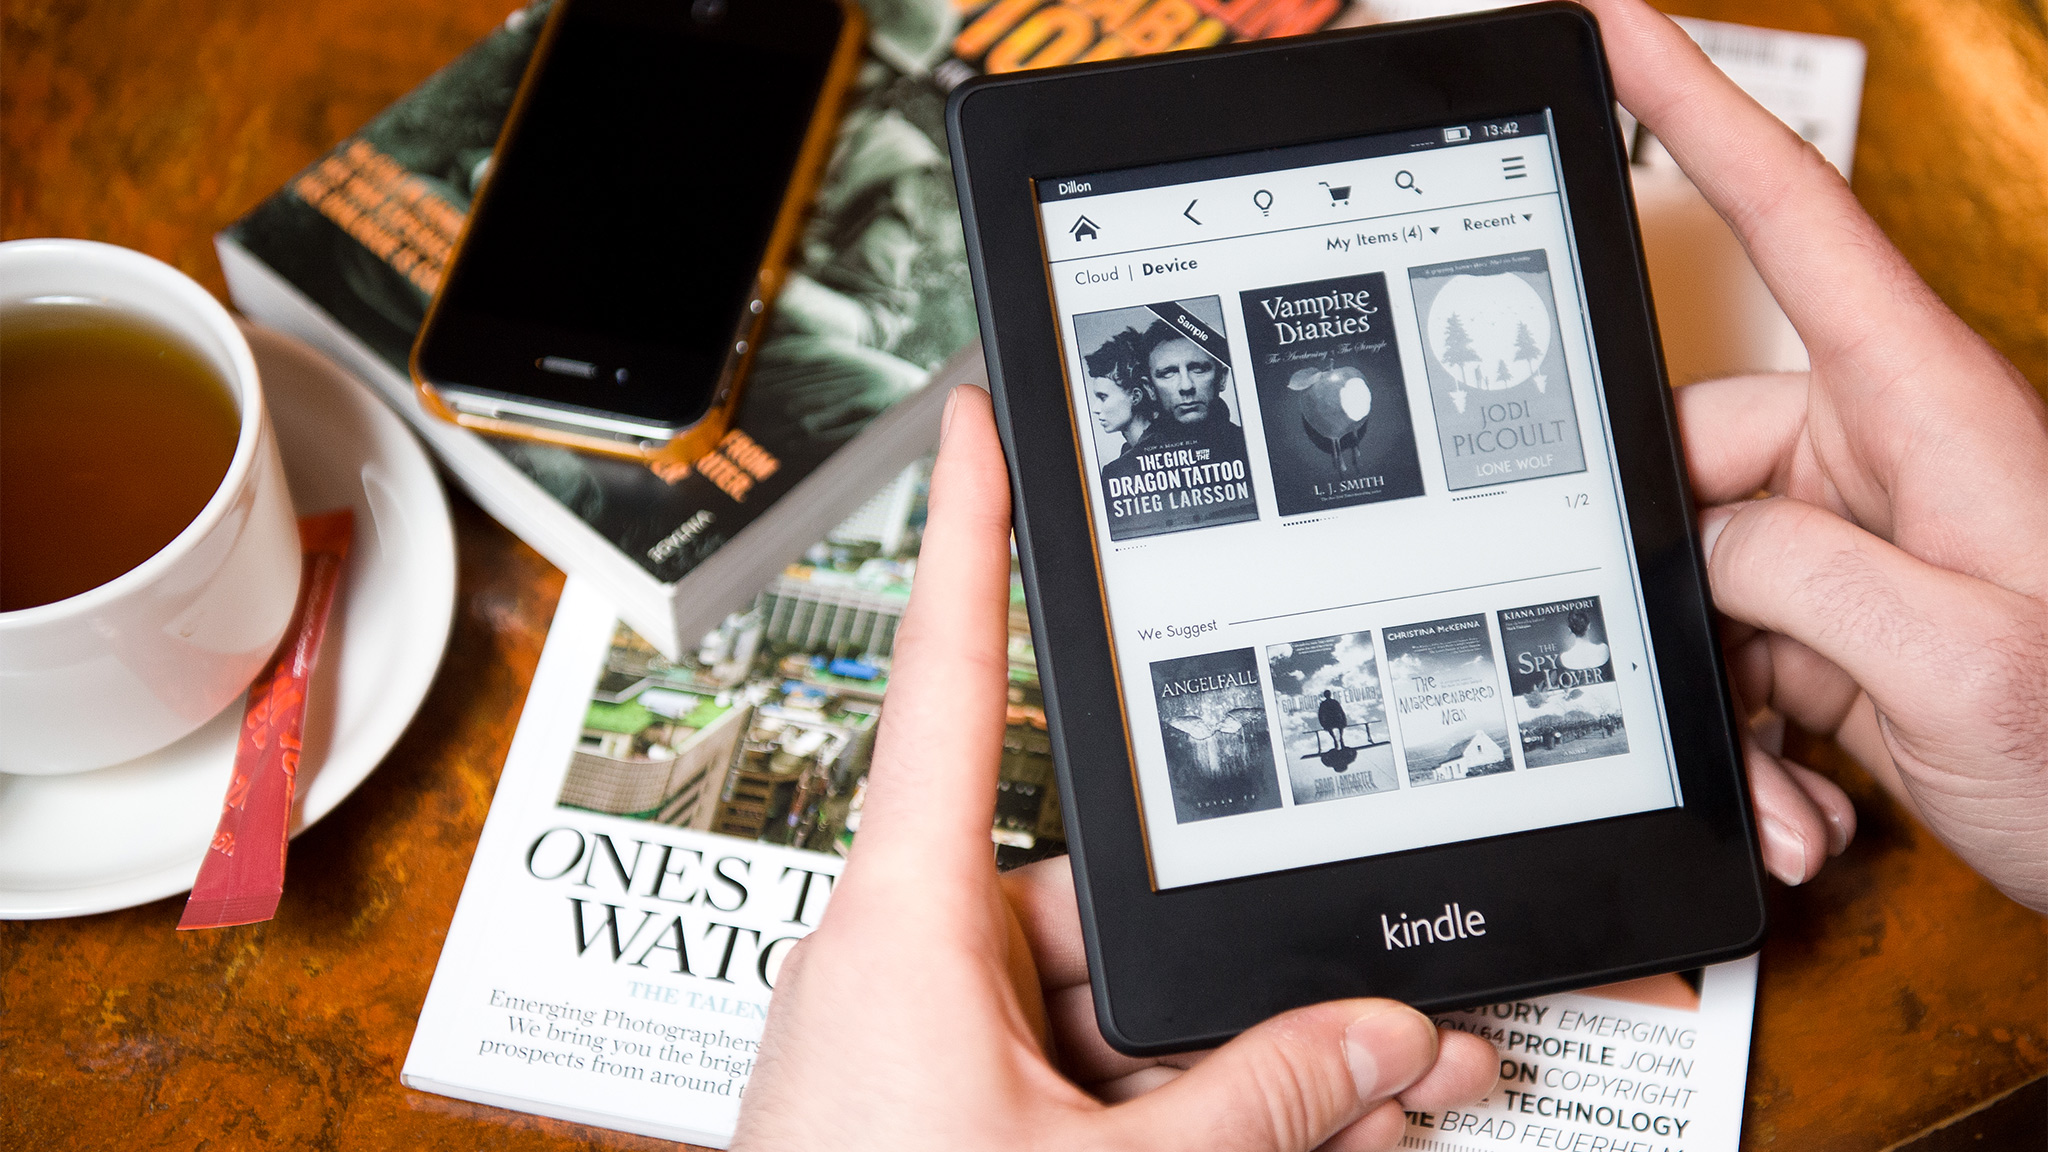 How to cancel Kindle Unlimited